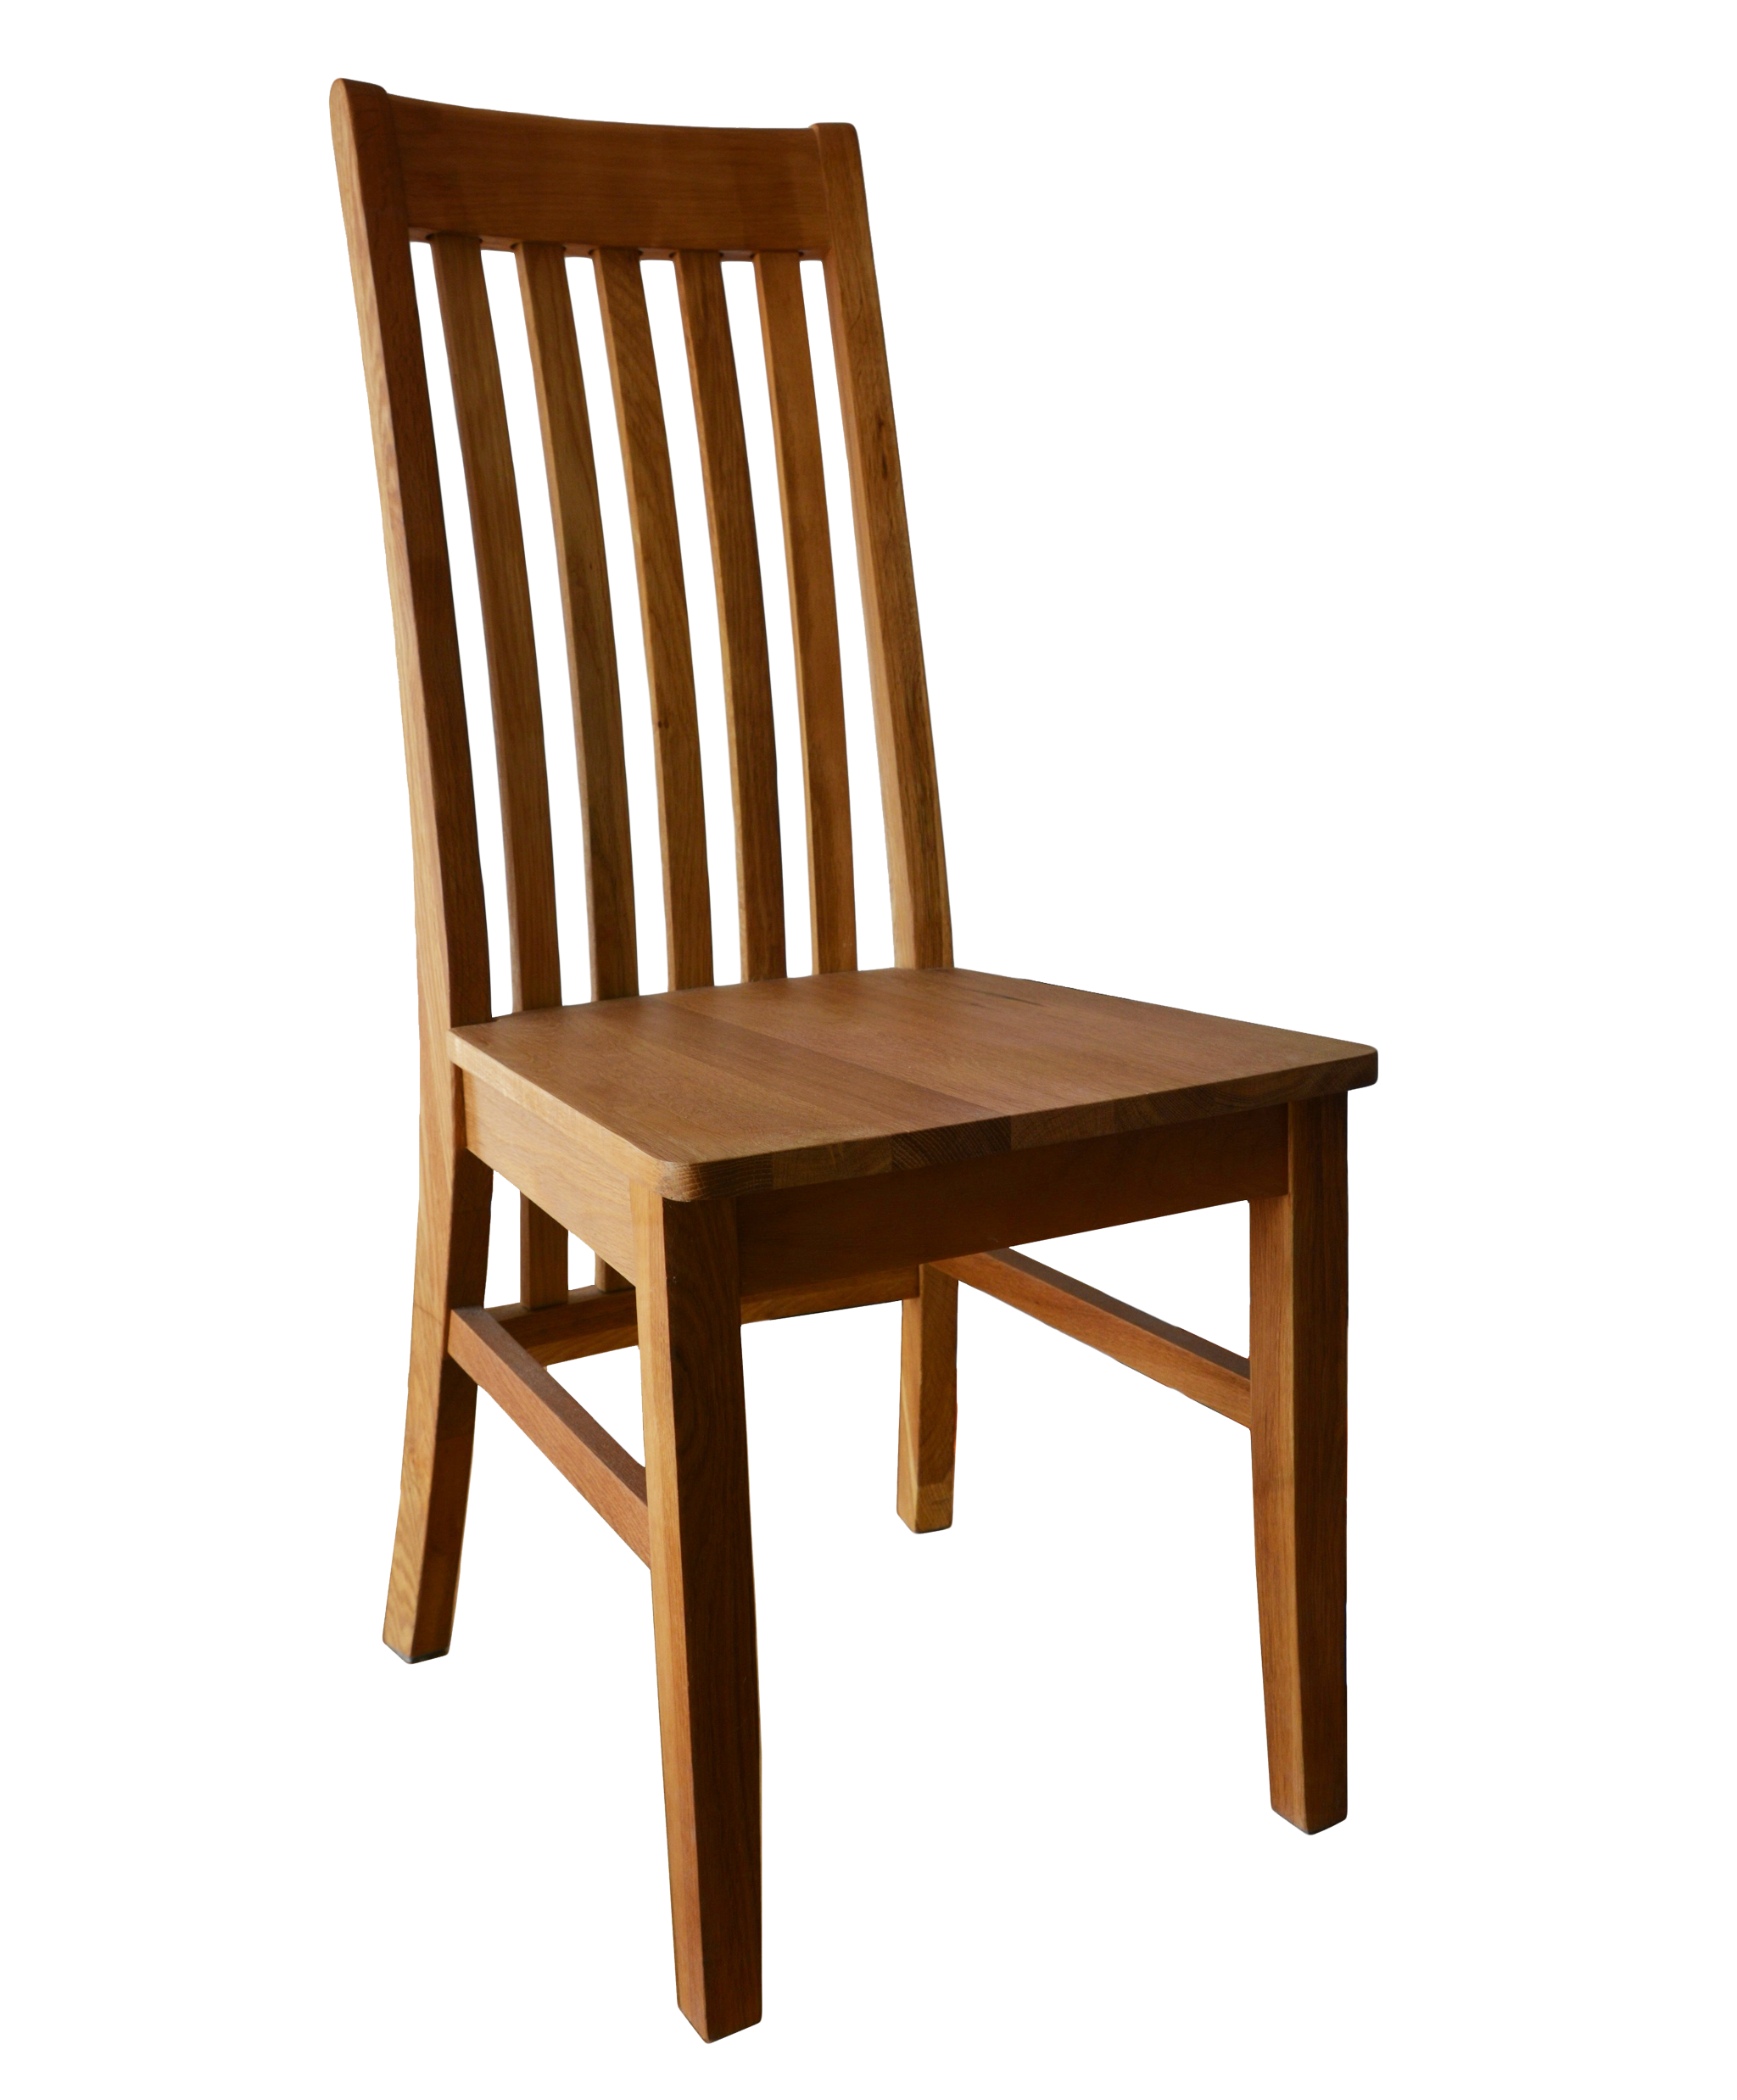 Wooden Furniture Chair